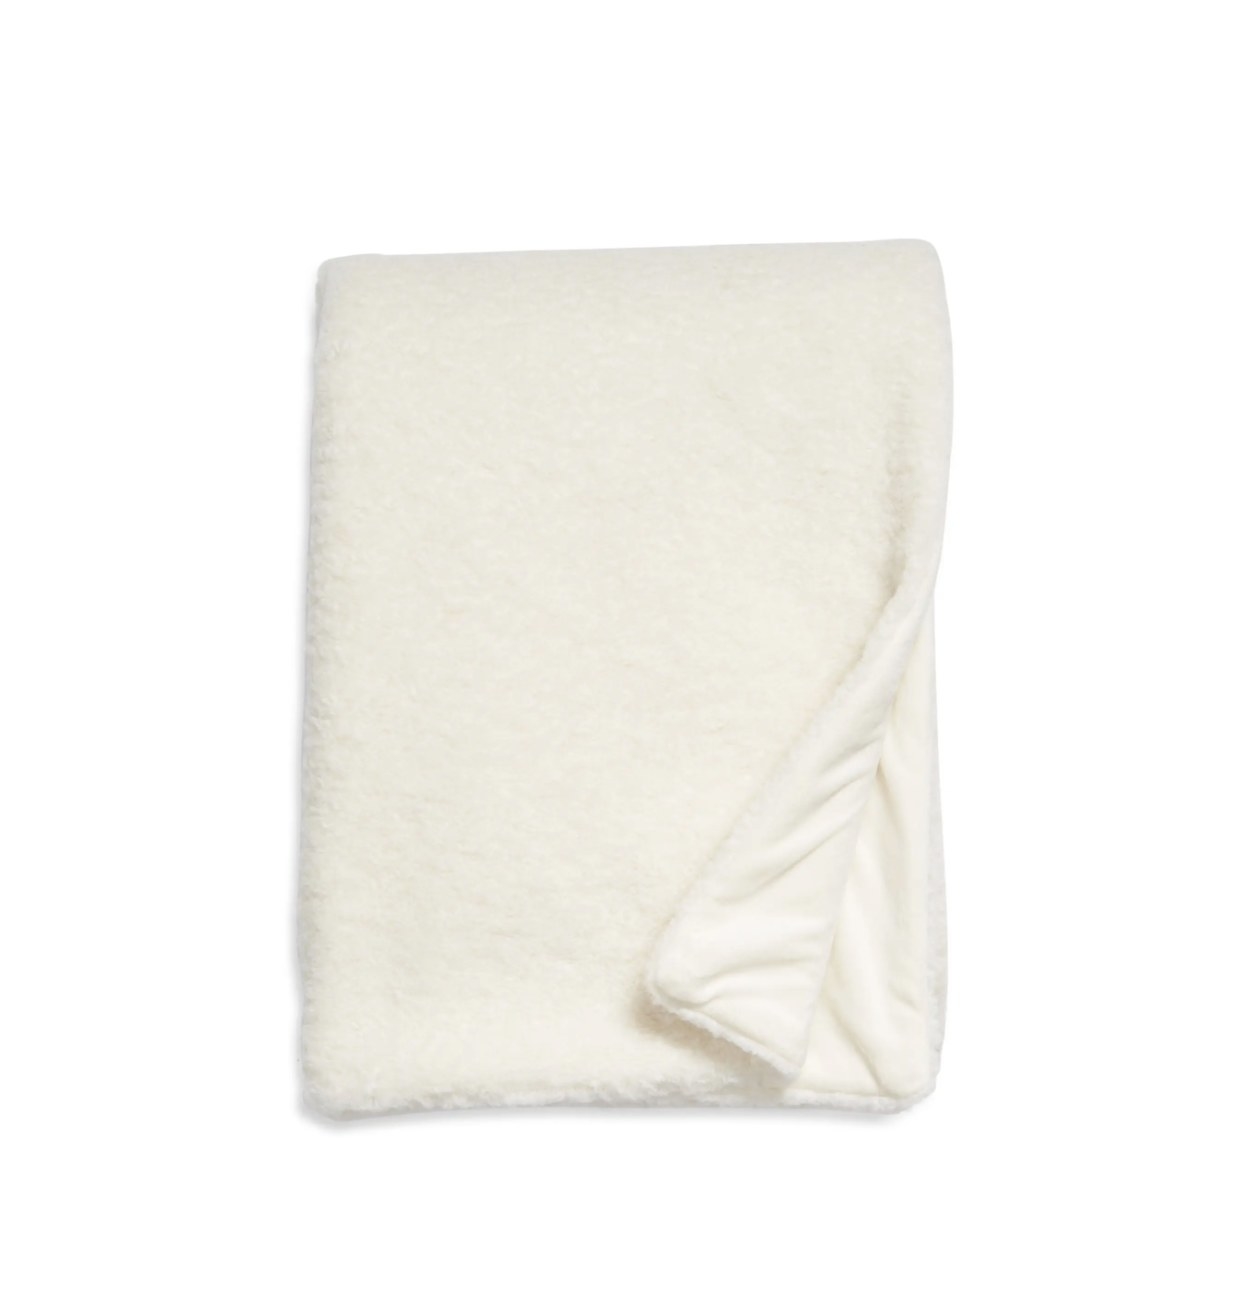 The faux fur oversized blanket in ivory